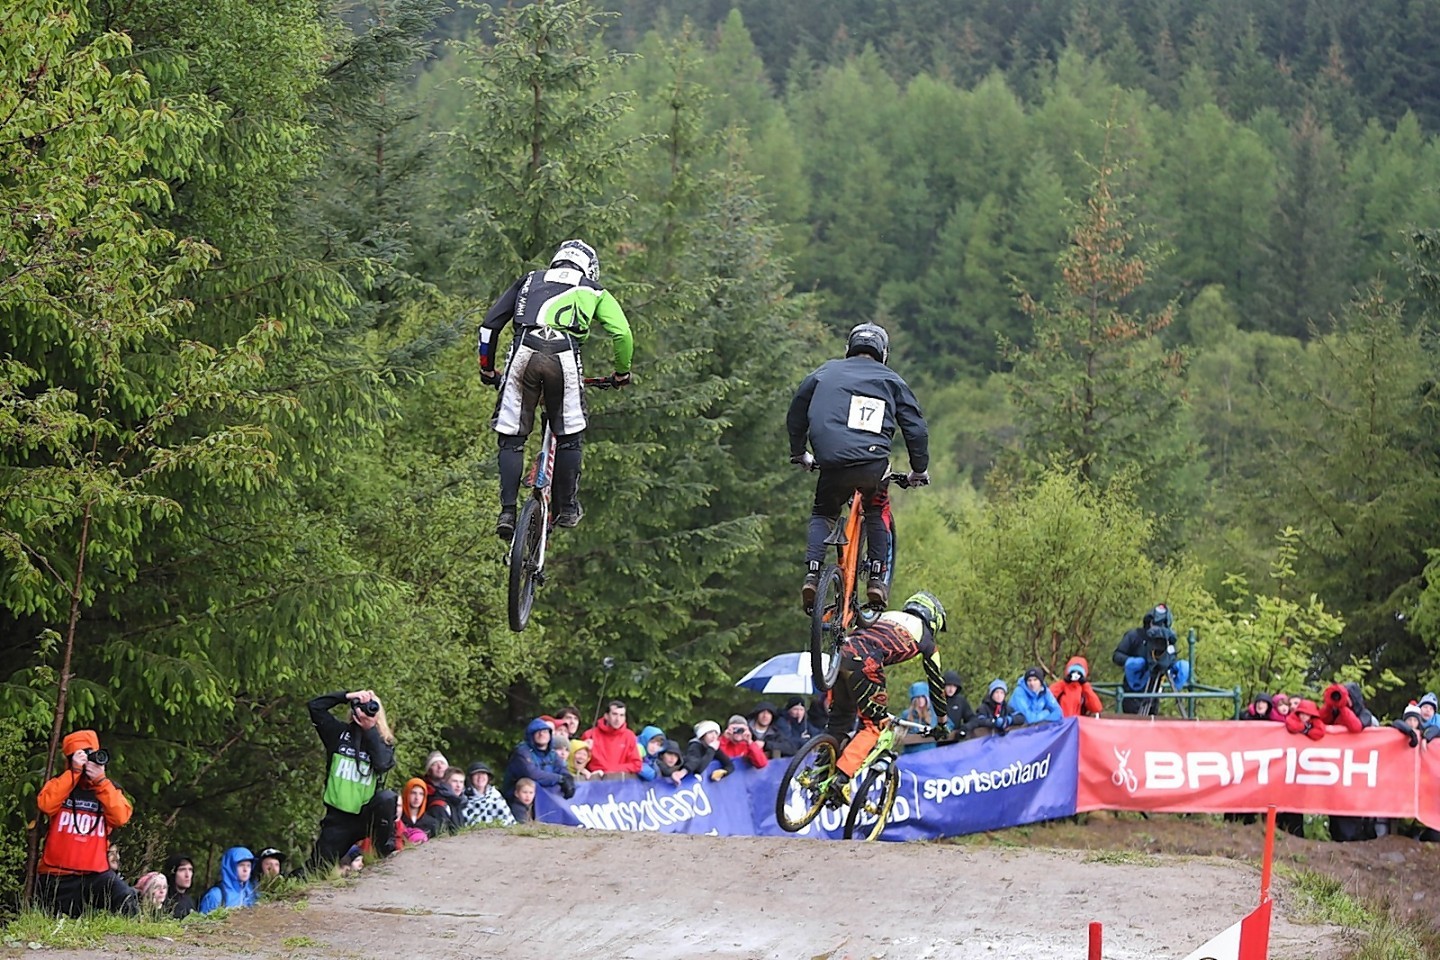 Riders compete on the 4X Pro Tour event at Fort William.